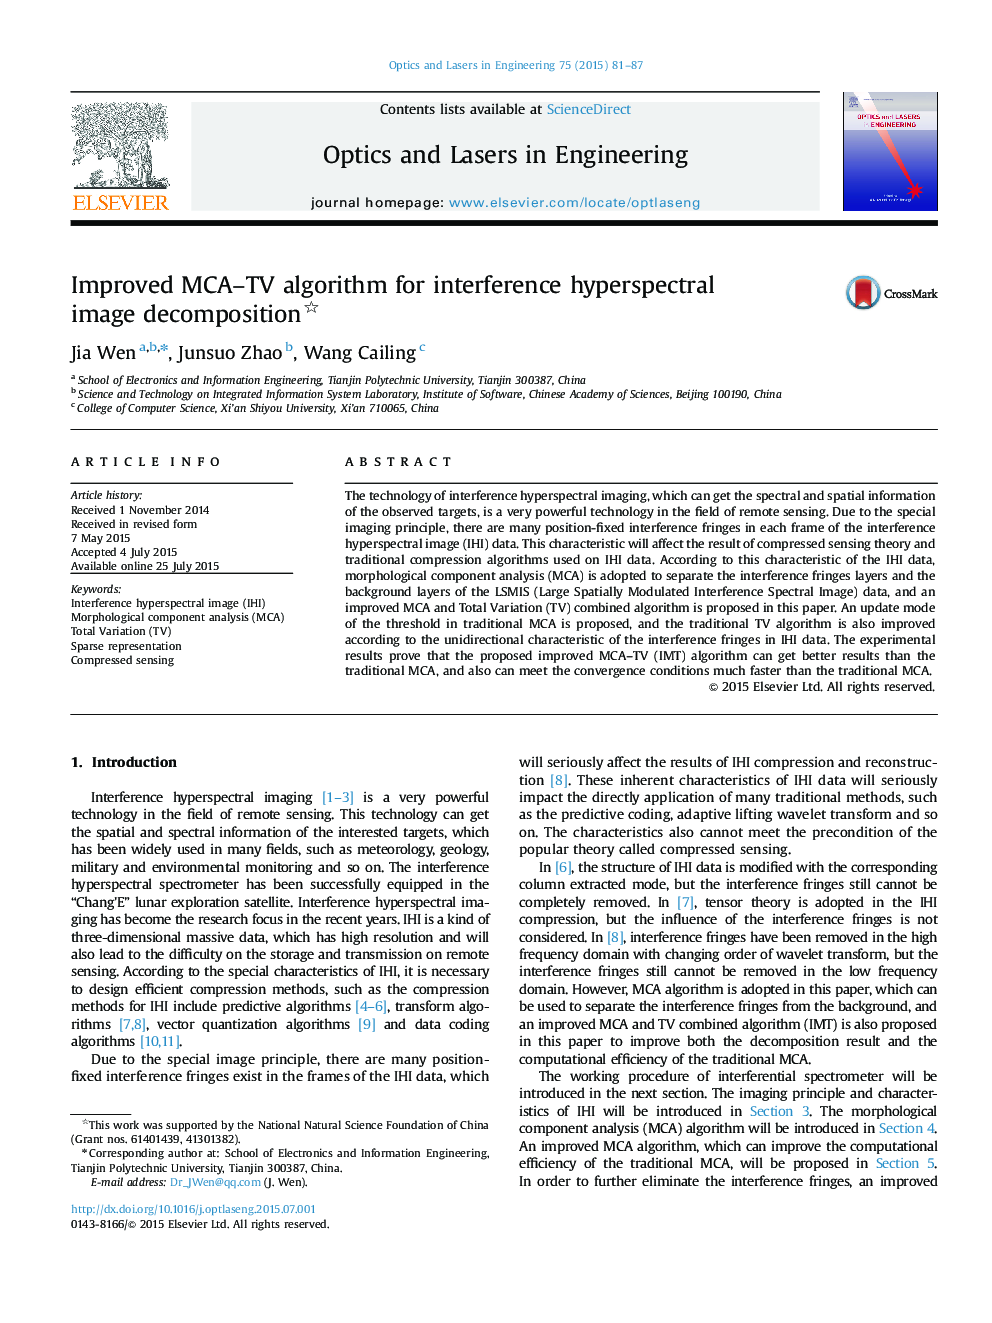 Improved MCA–TV algorithm for interference hyperspectral image decomposition 